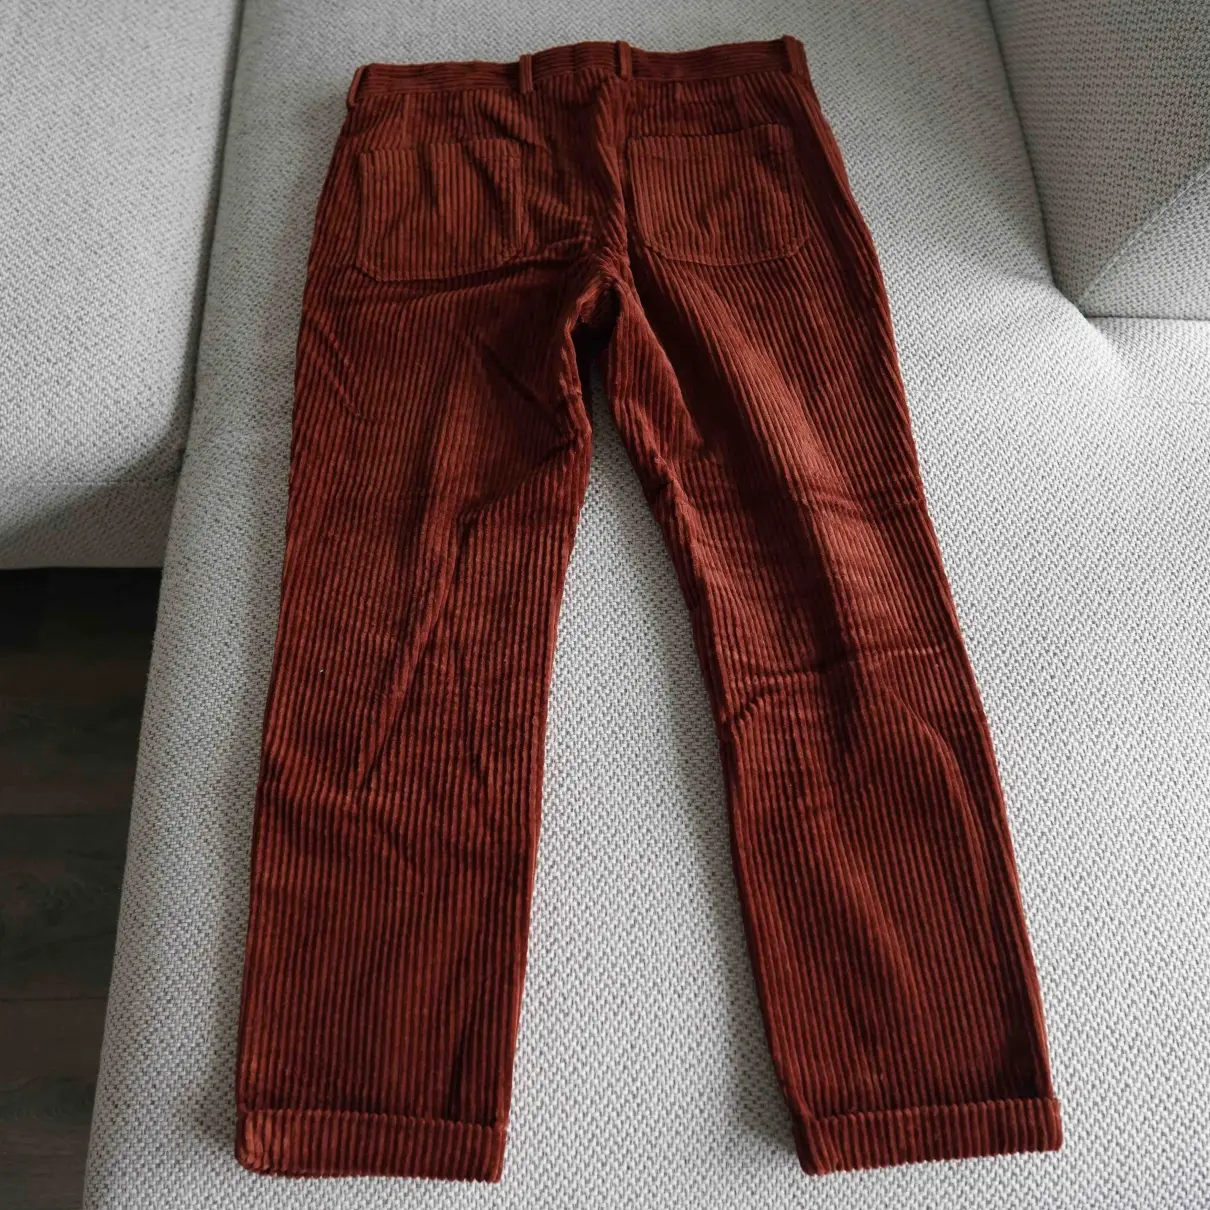 Marni Trousers for sale